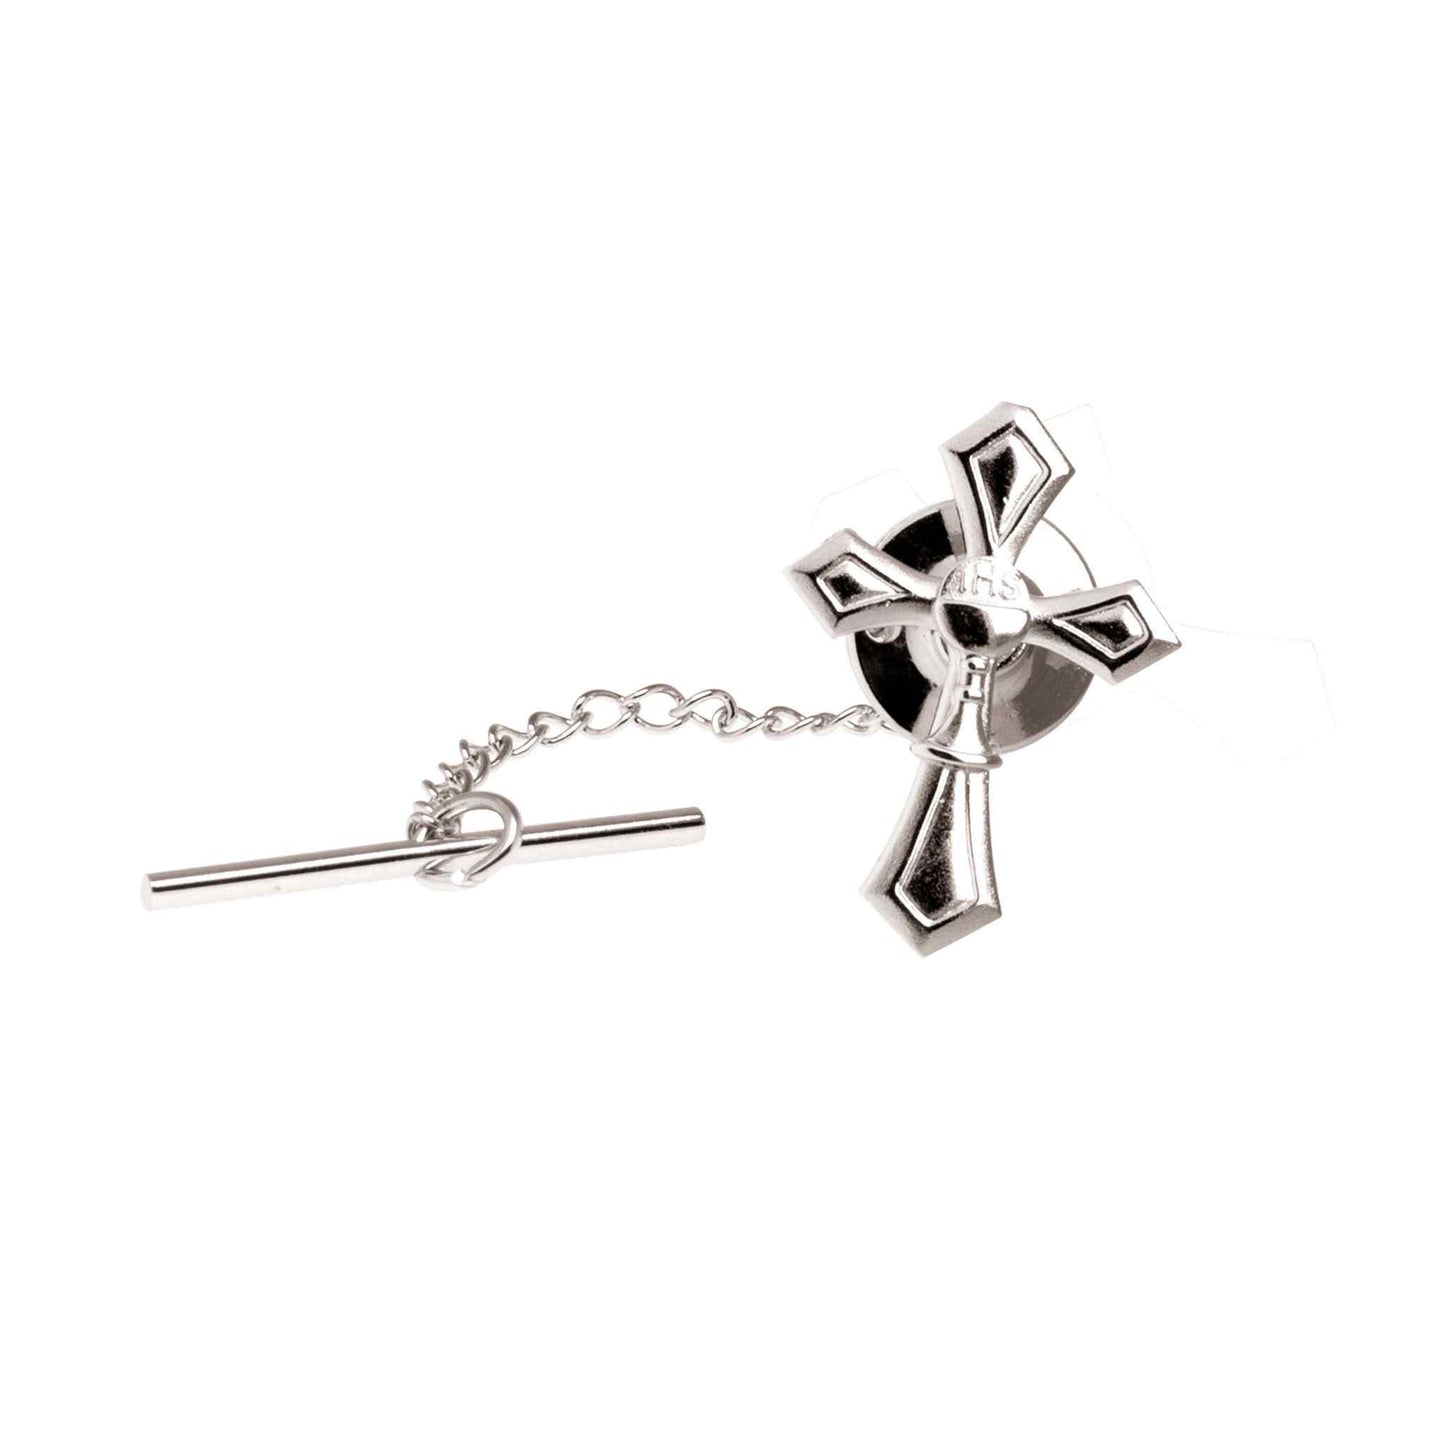 A gothic communion tie tack displayed on a neutral white background.